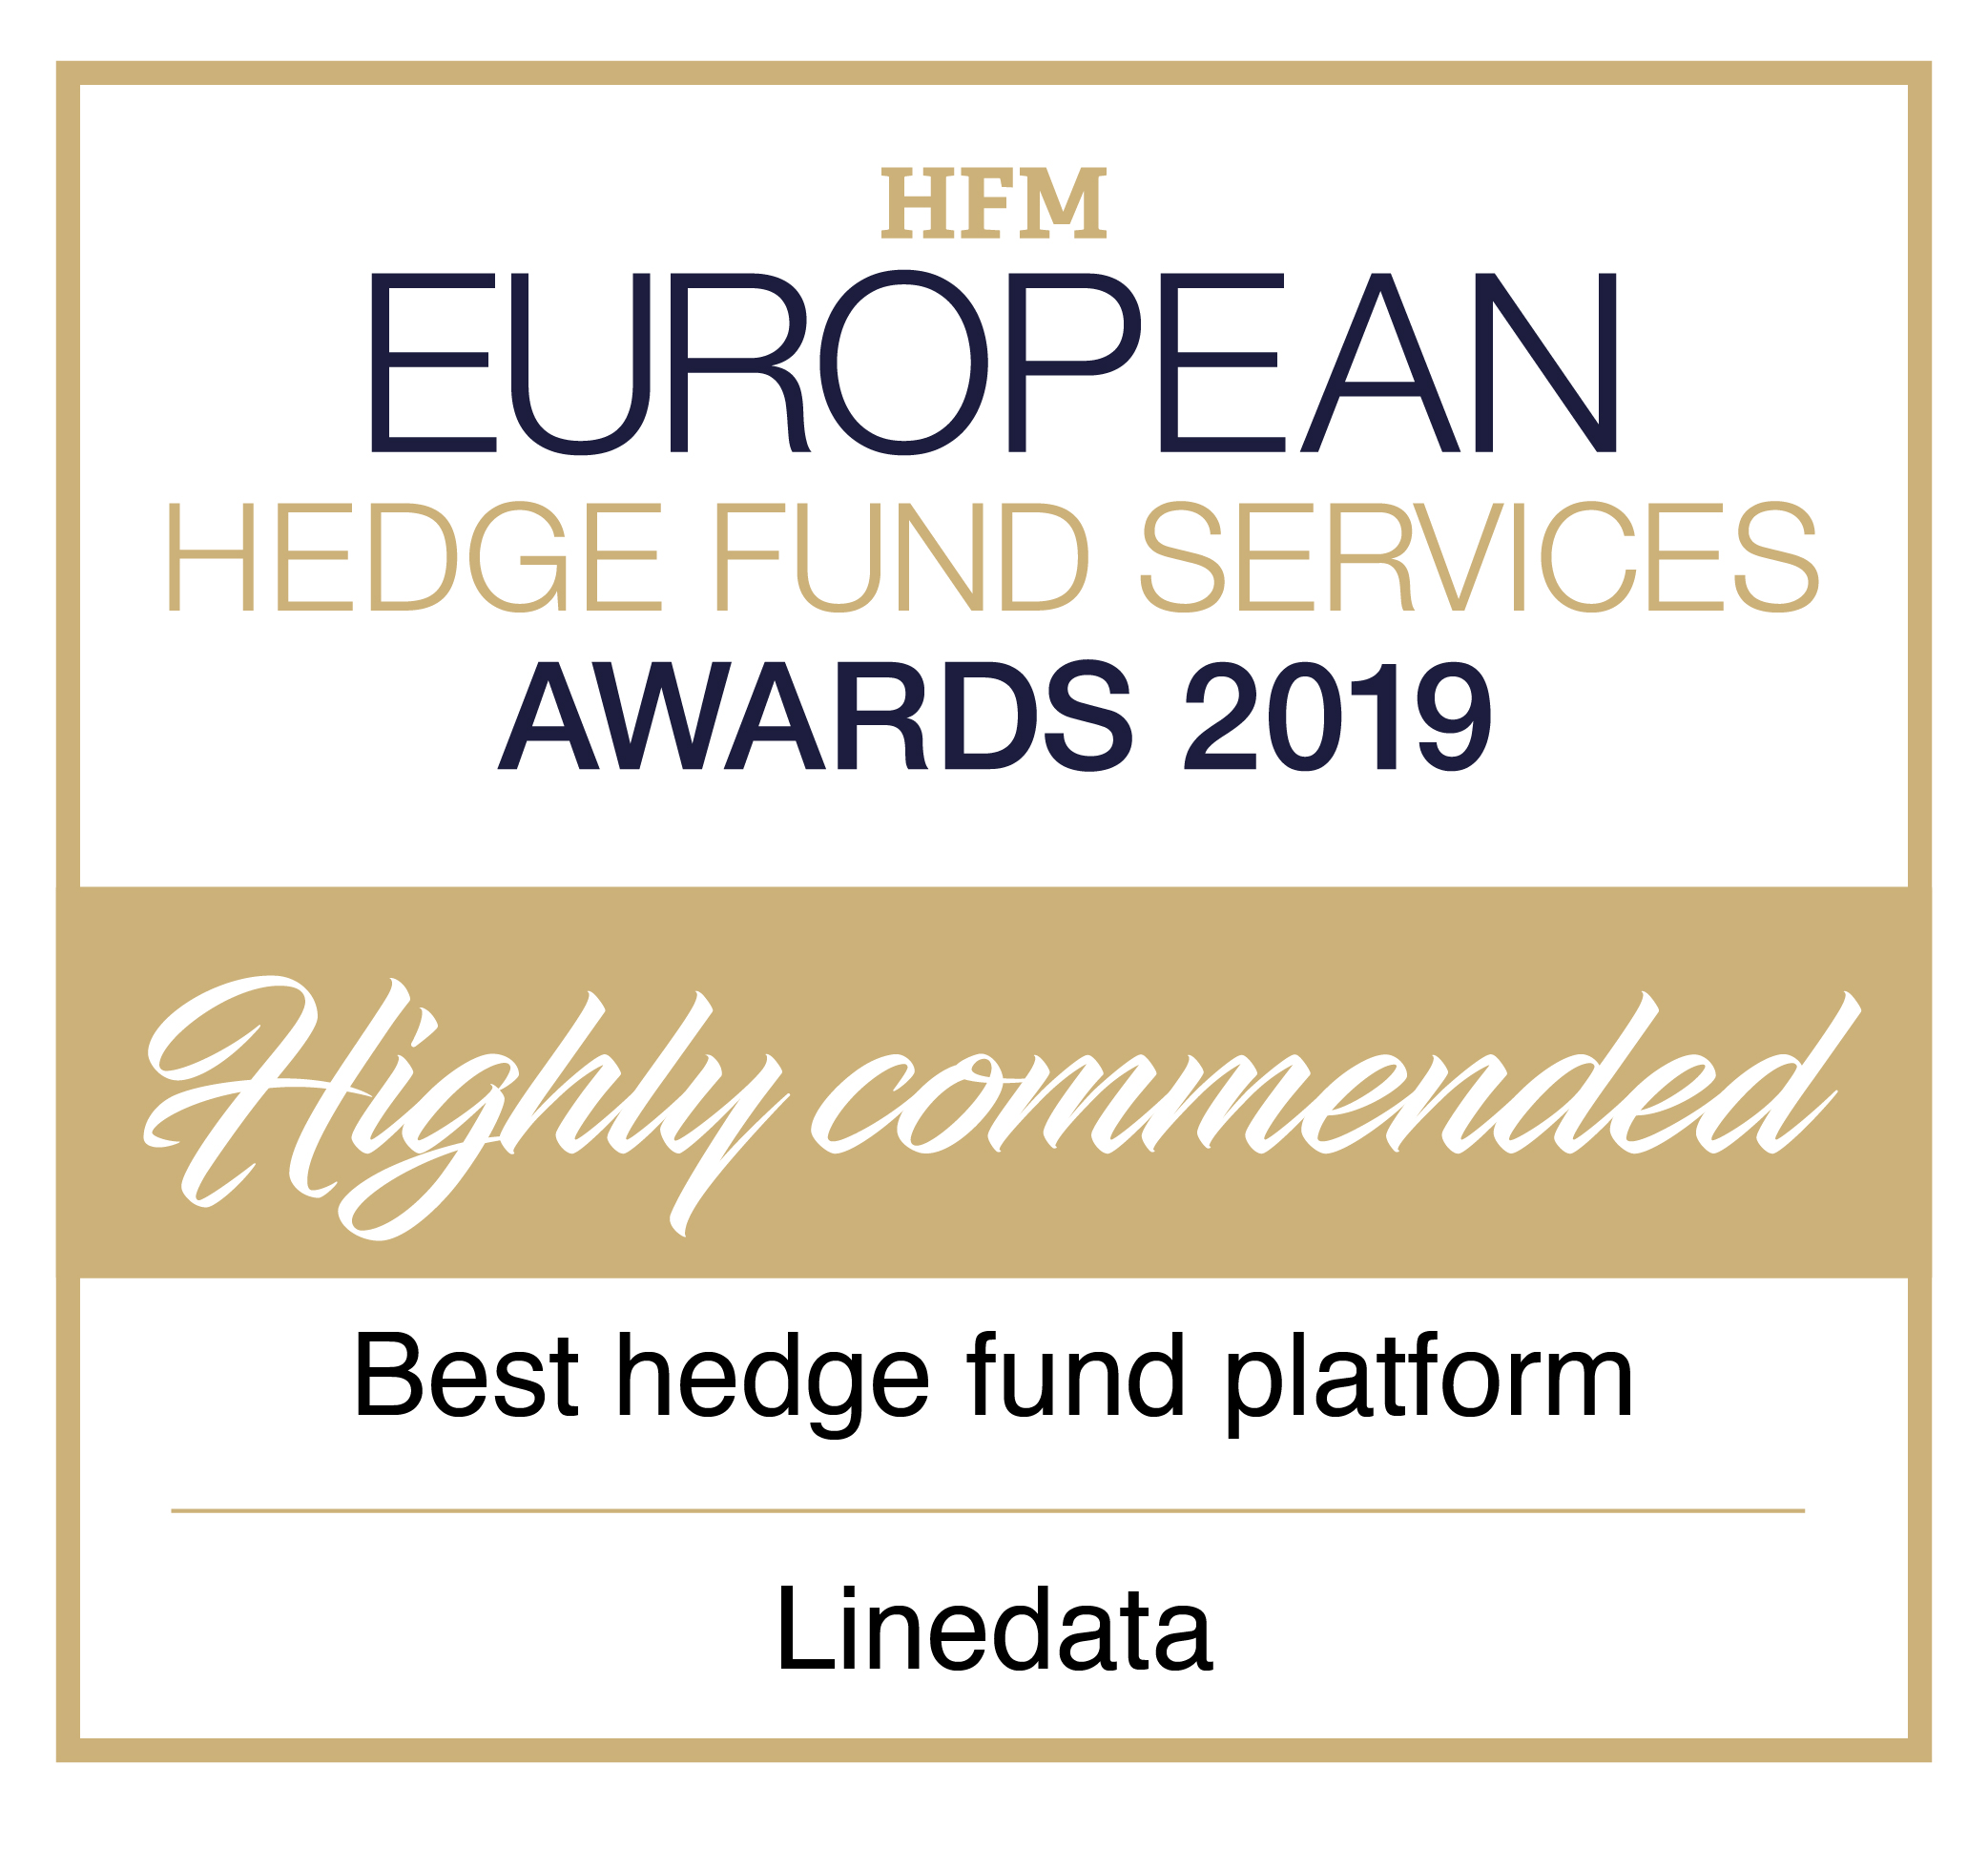 Linedata got highly commended at the HFM European Hedge Fund Services